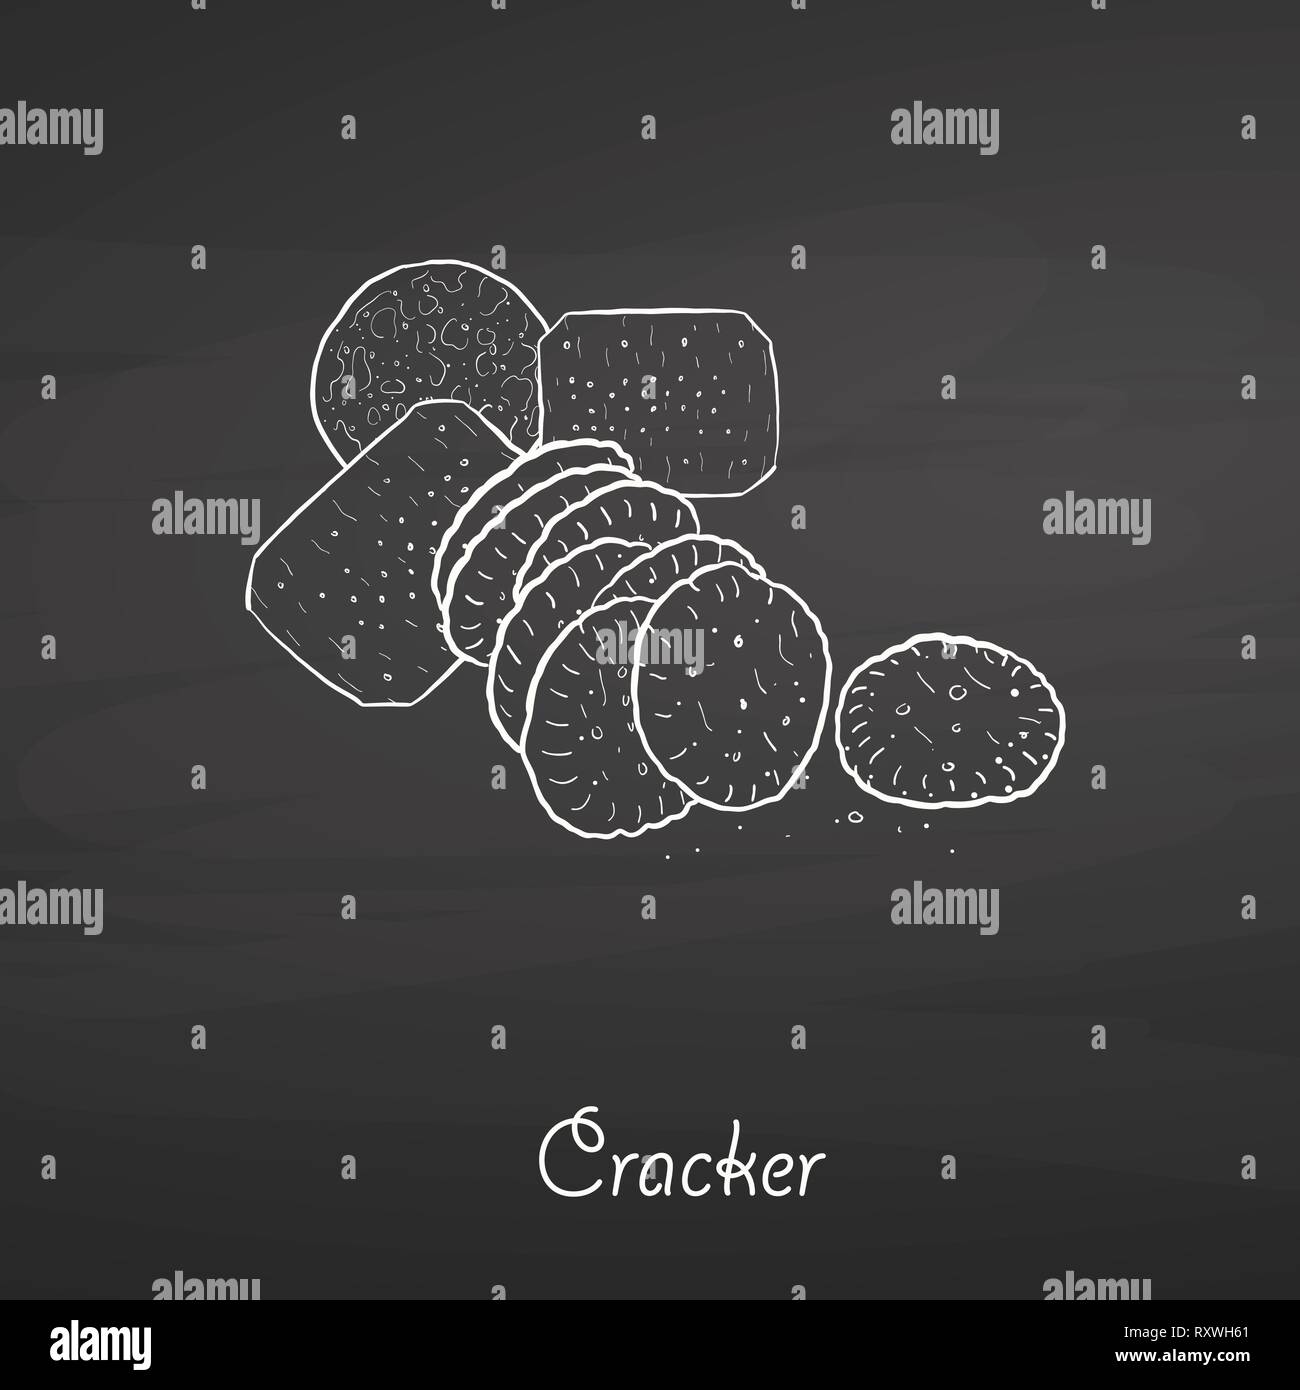 Cracker food sketch on chalkboard. Vector drawing of Crispy bread, usually known in International. Food illustration series. Stock Vector